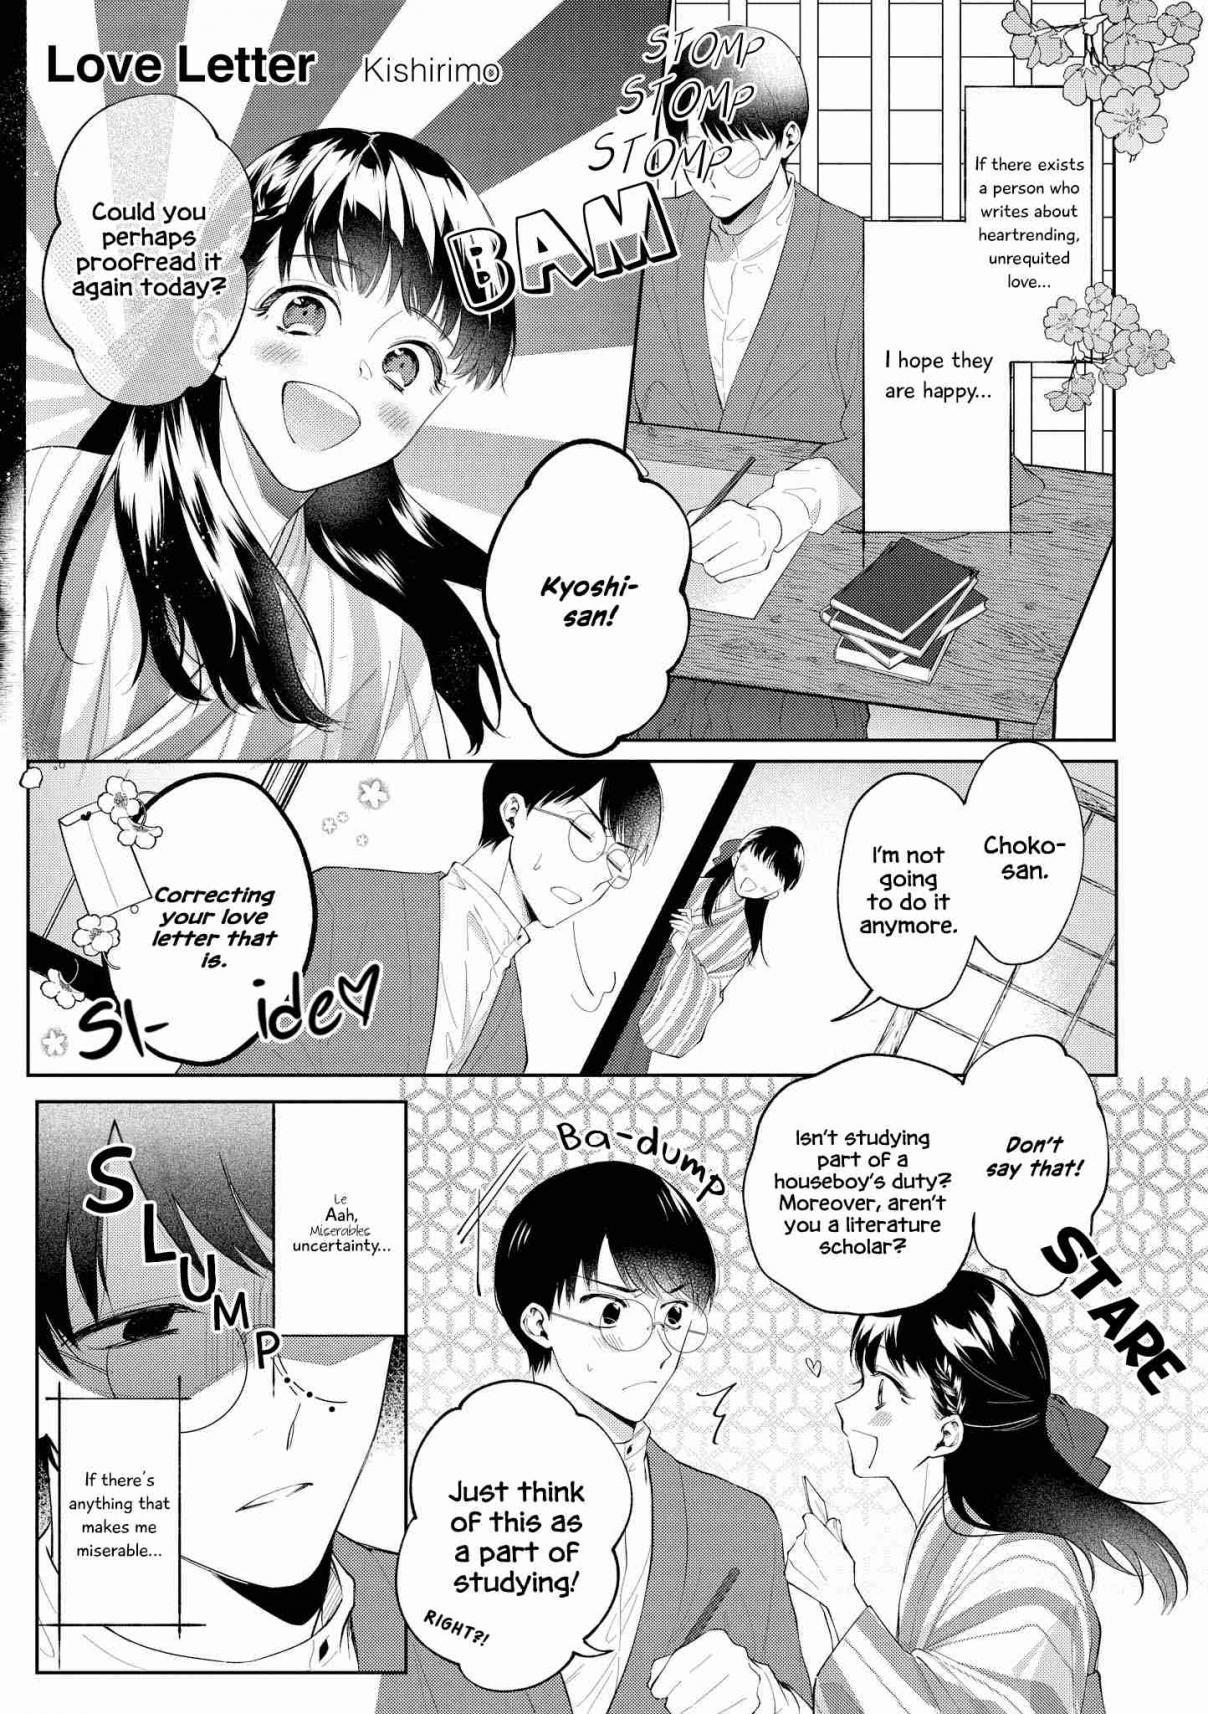 “It’s too precious and hard to read !!” 4P Short Stories Vol. 1 Ch. 10 Love Letter [by Kishirimo]